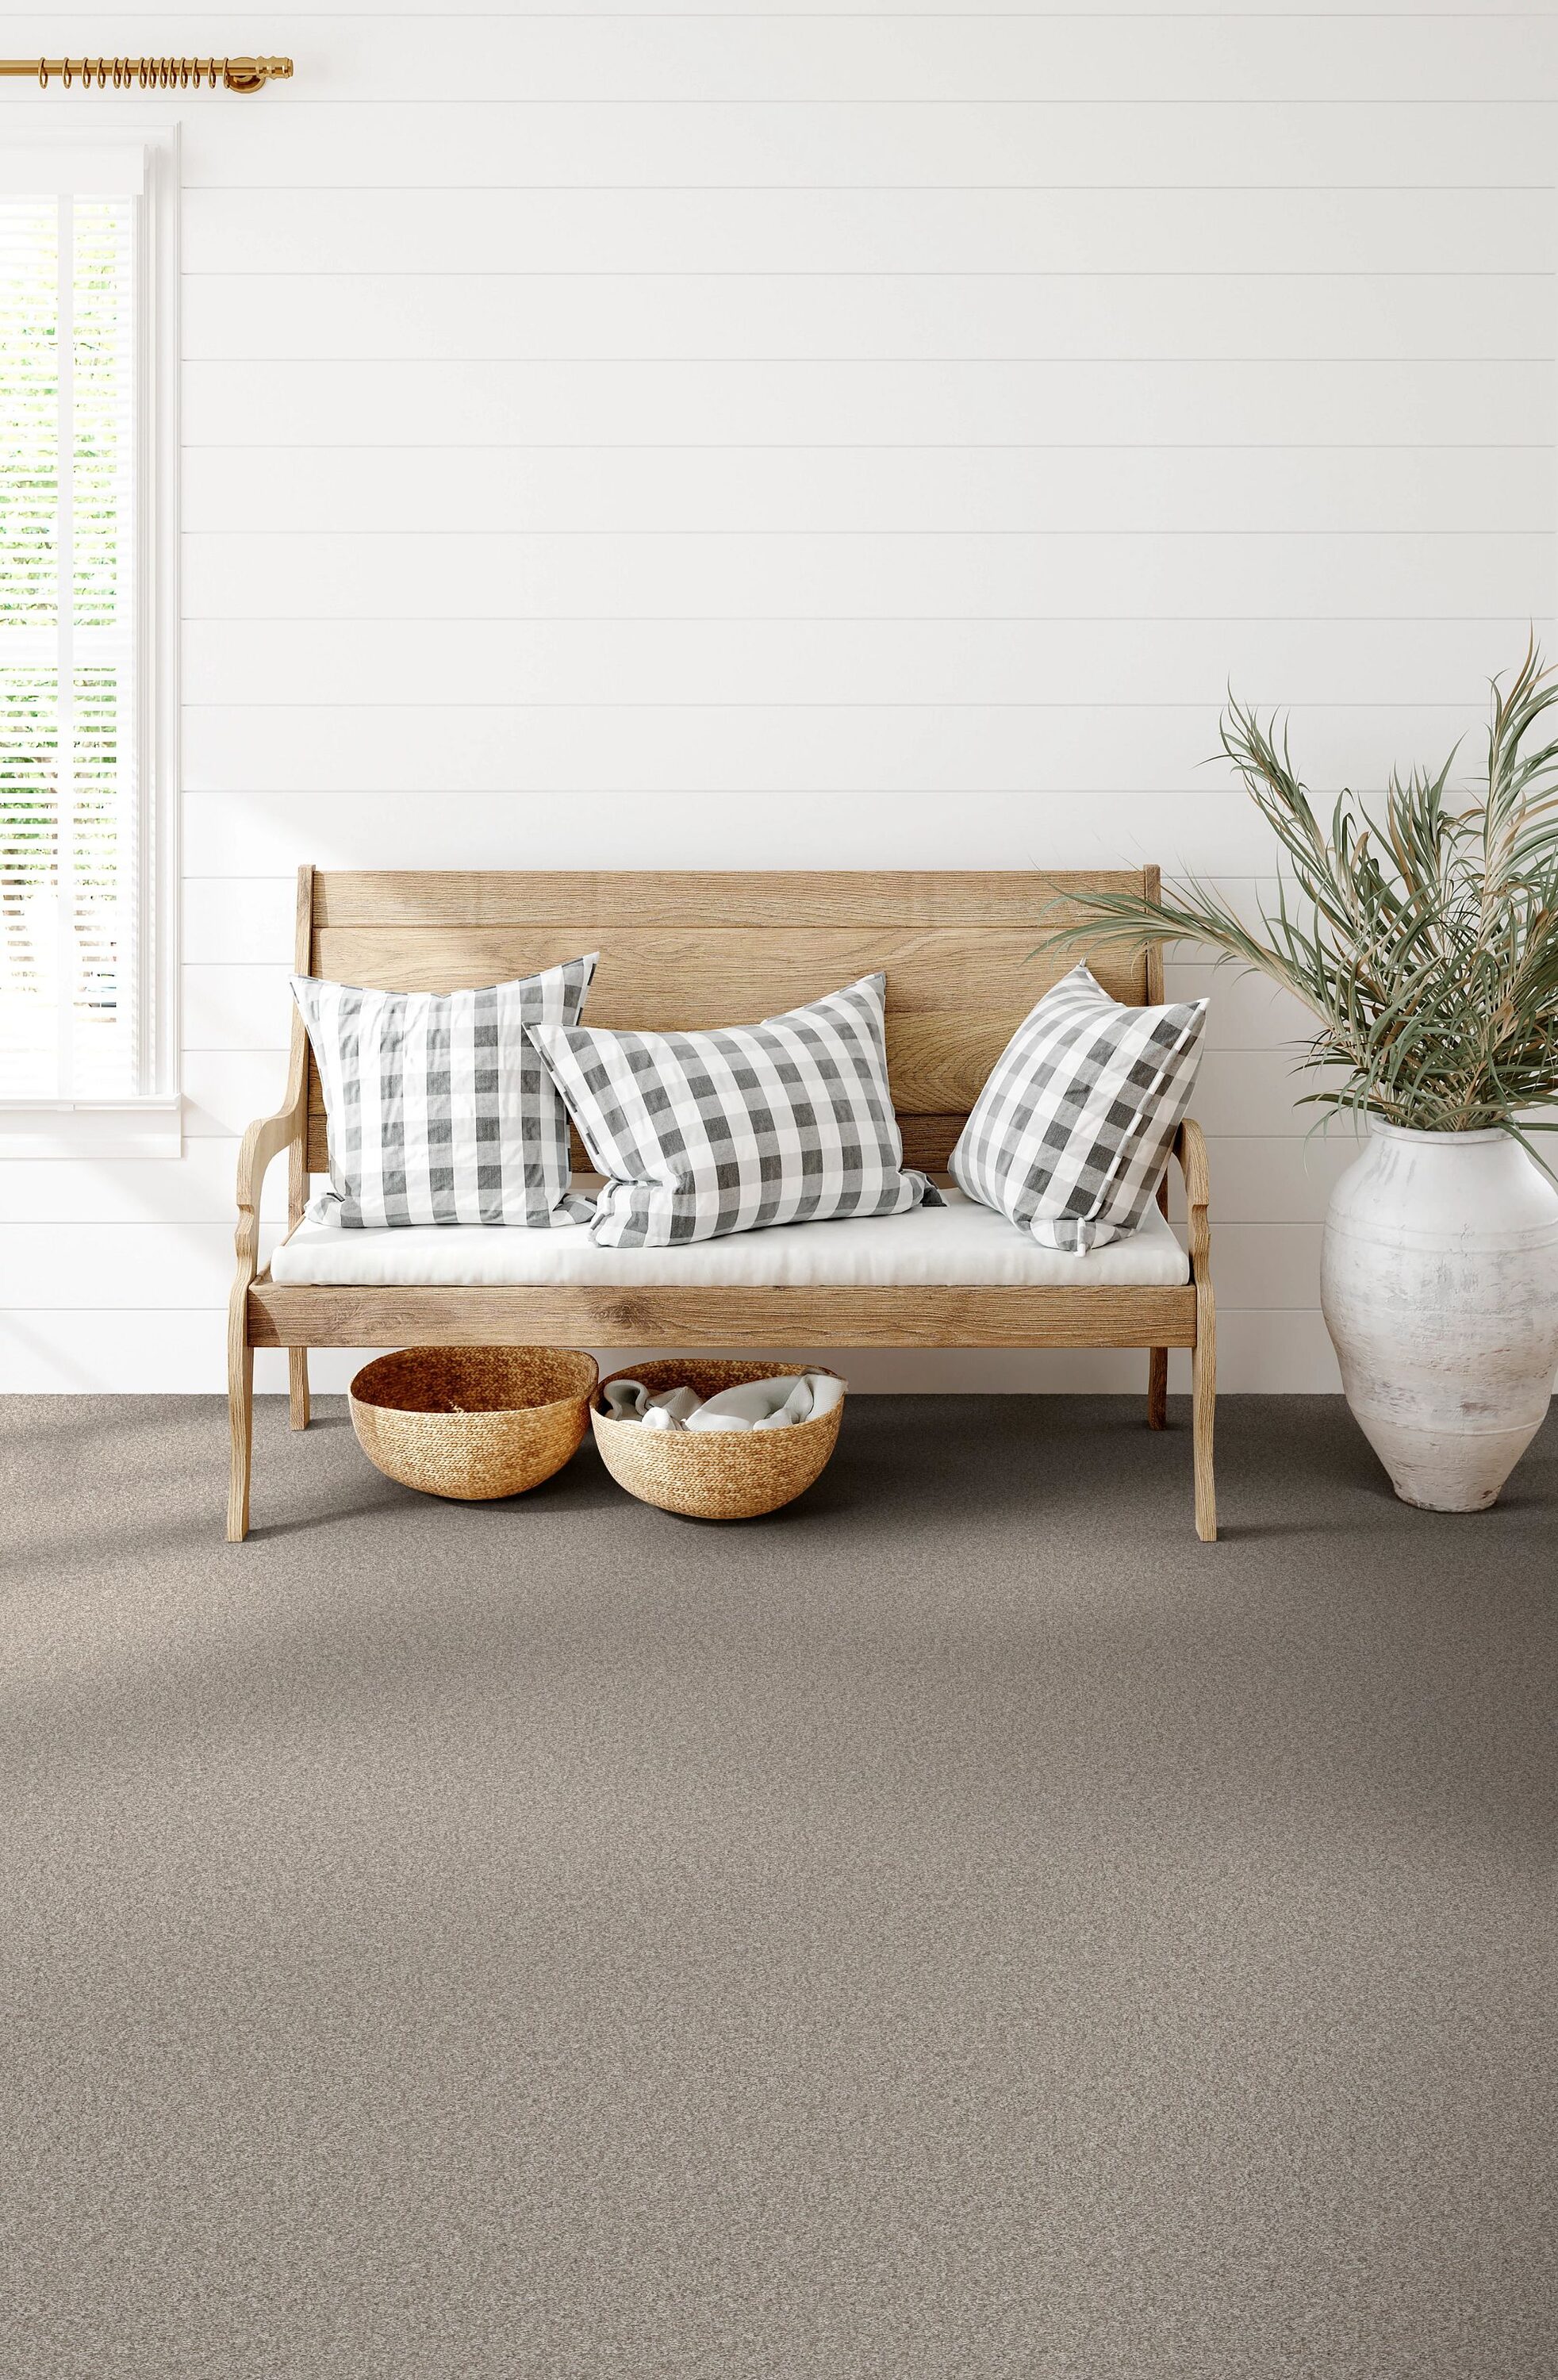 STAINMASTER Carpet Effortless Carpet Indoor at III in Chic Textured Greige the Appeal department